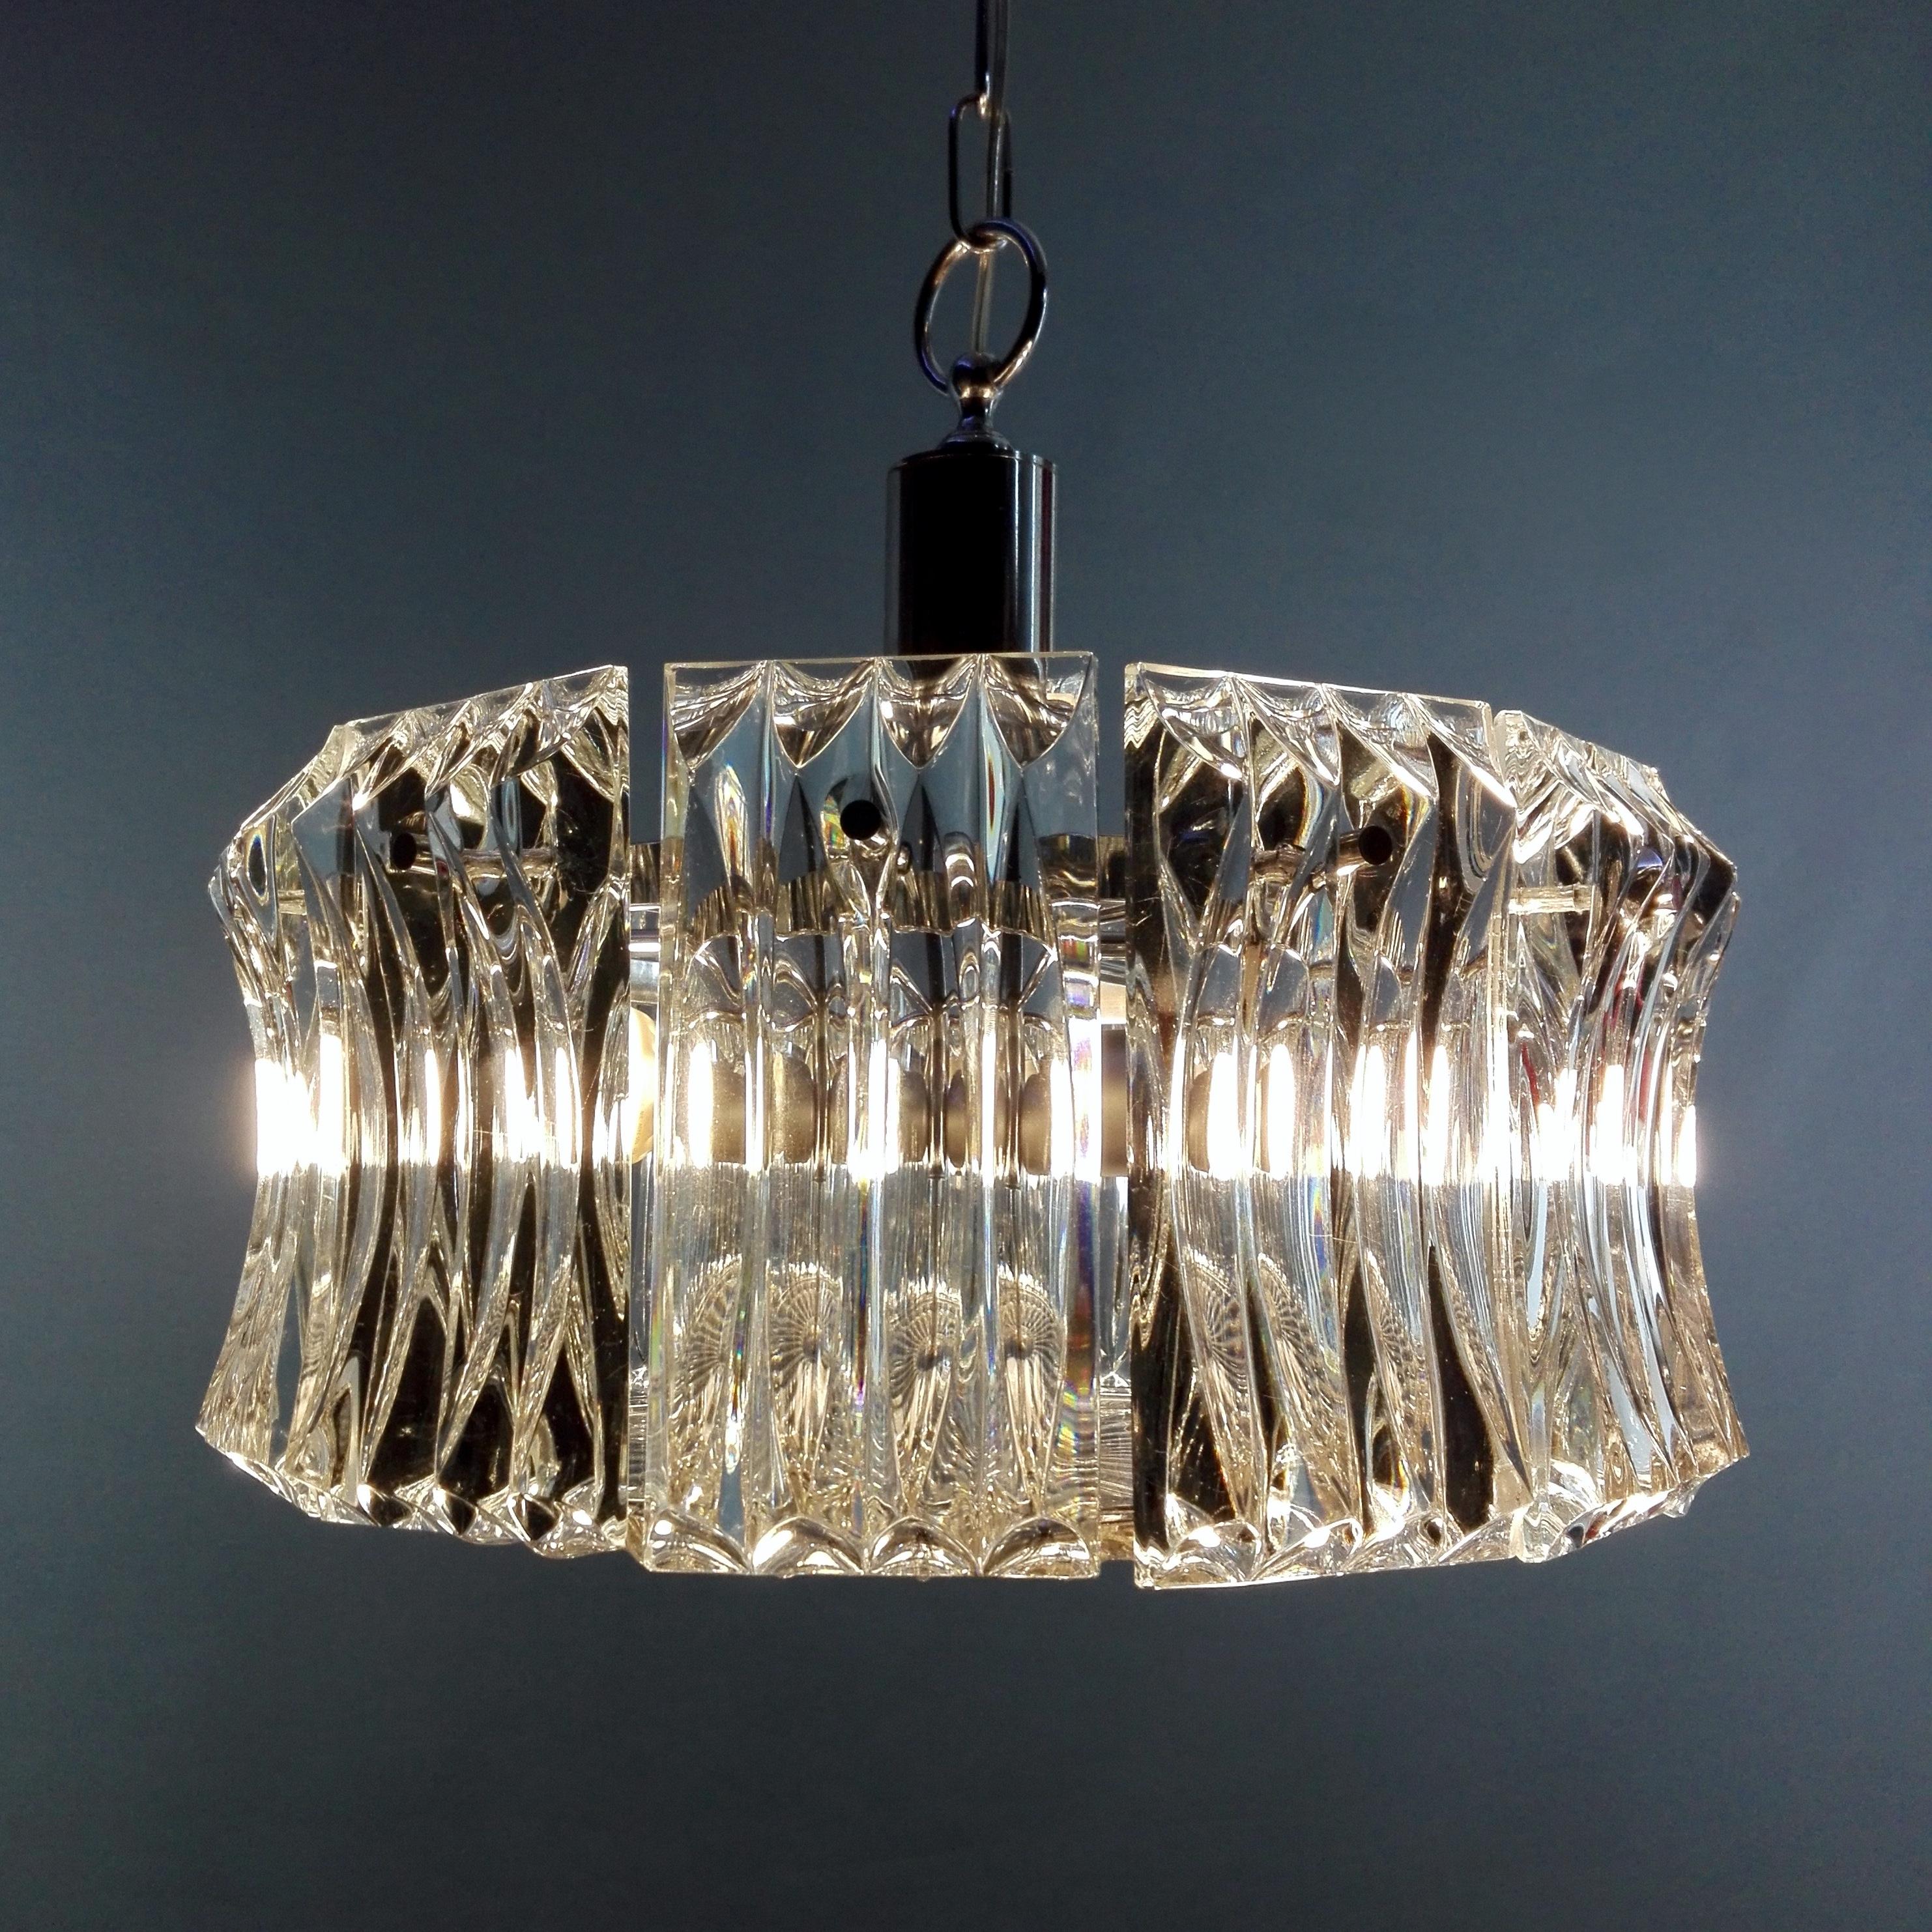 Wonderful Italian 60s three-light chandelier, design Paolo Venini attributable. The frame supports 12 solid clear glass worked plates, fixed to a circular chrome structure. Another solid round worked glass plate is fixed at the bottom to filter the